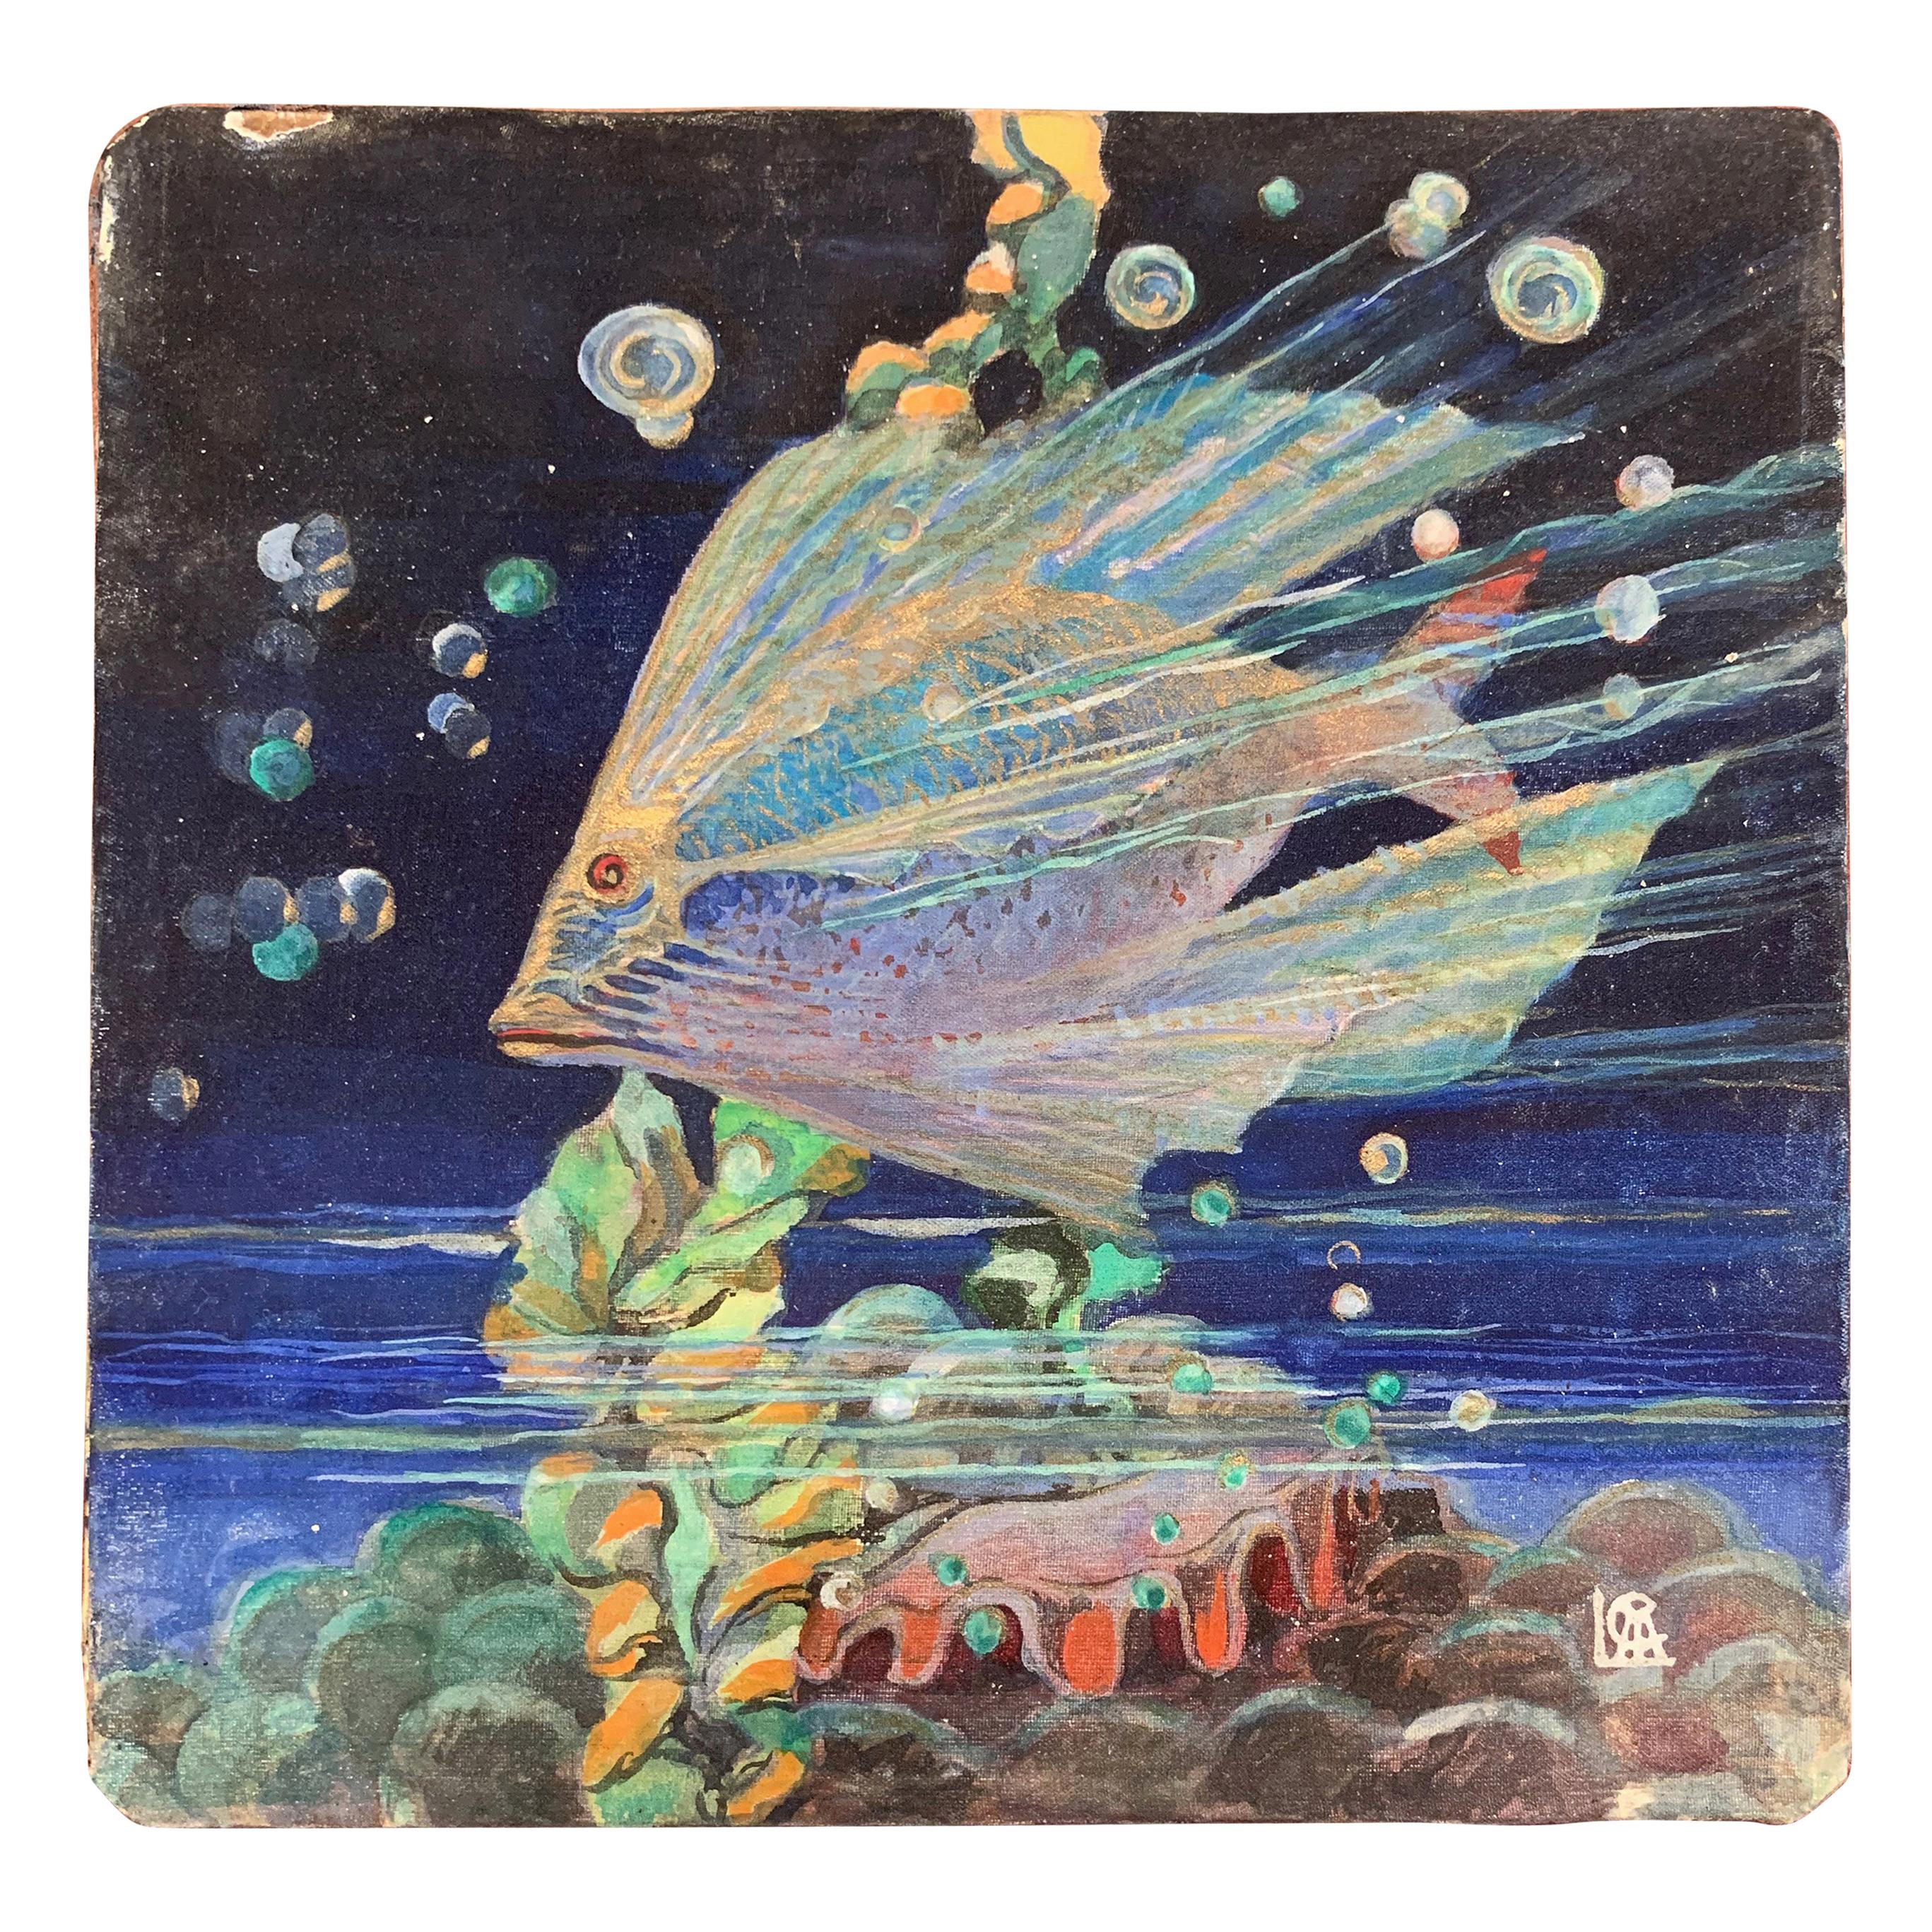 "Tropical Fish and Giant Clam," Brilliant Art Deco Painting of Undersea Life